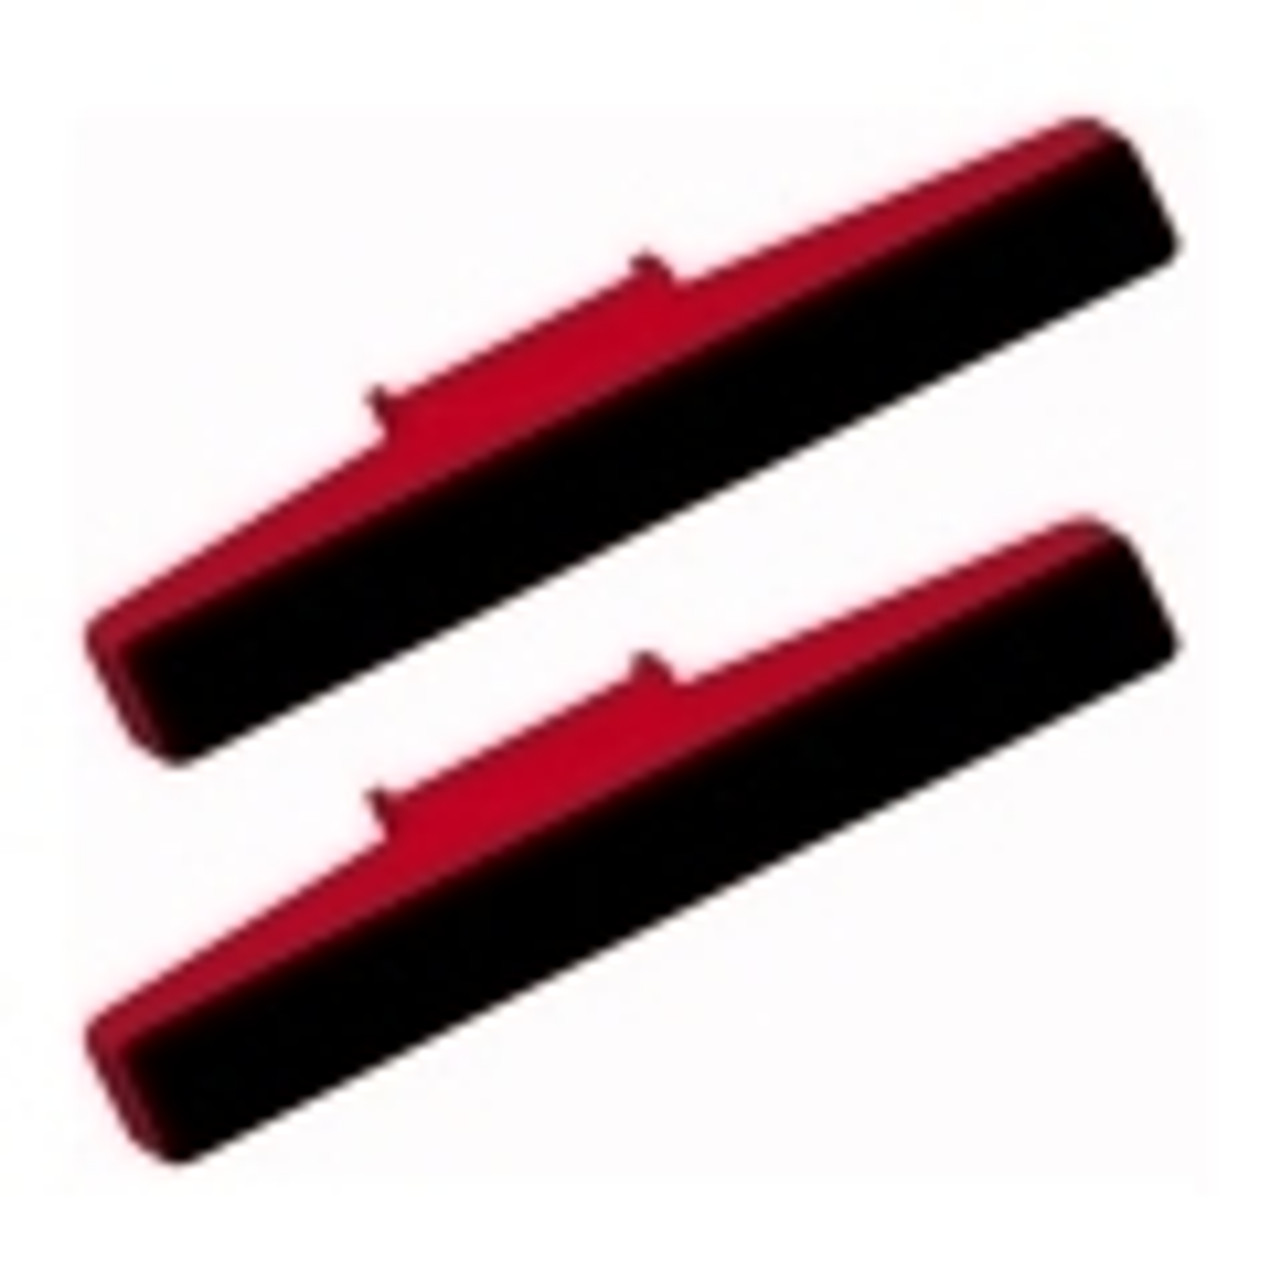 Parallel Clamp Accessories